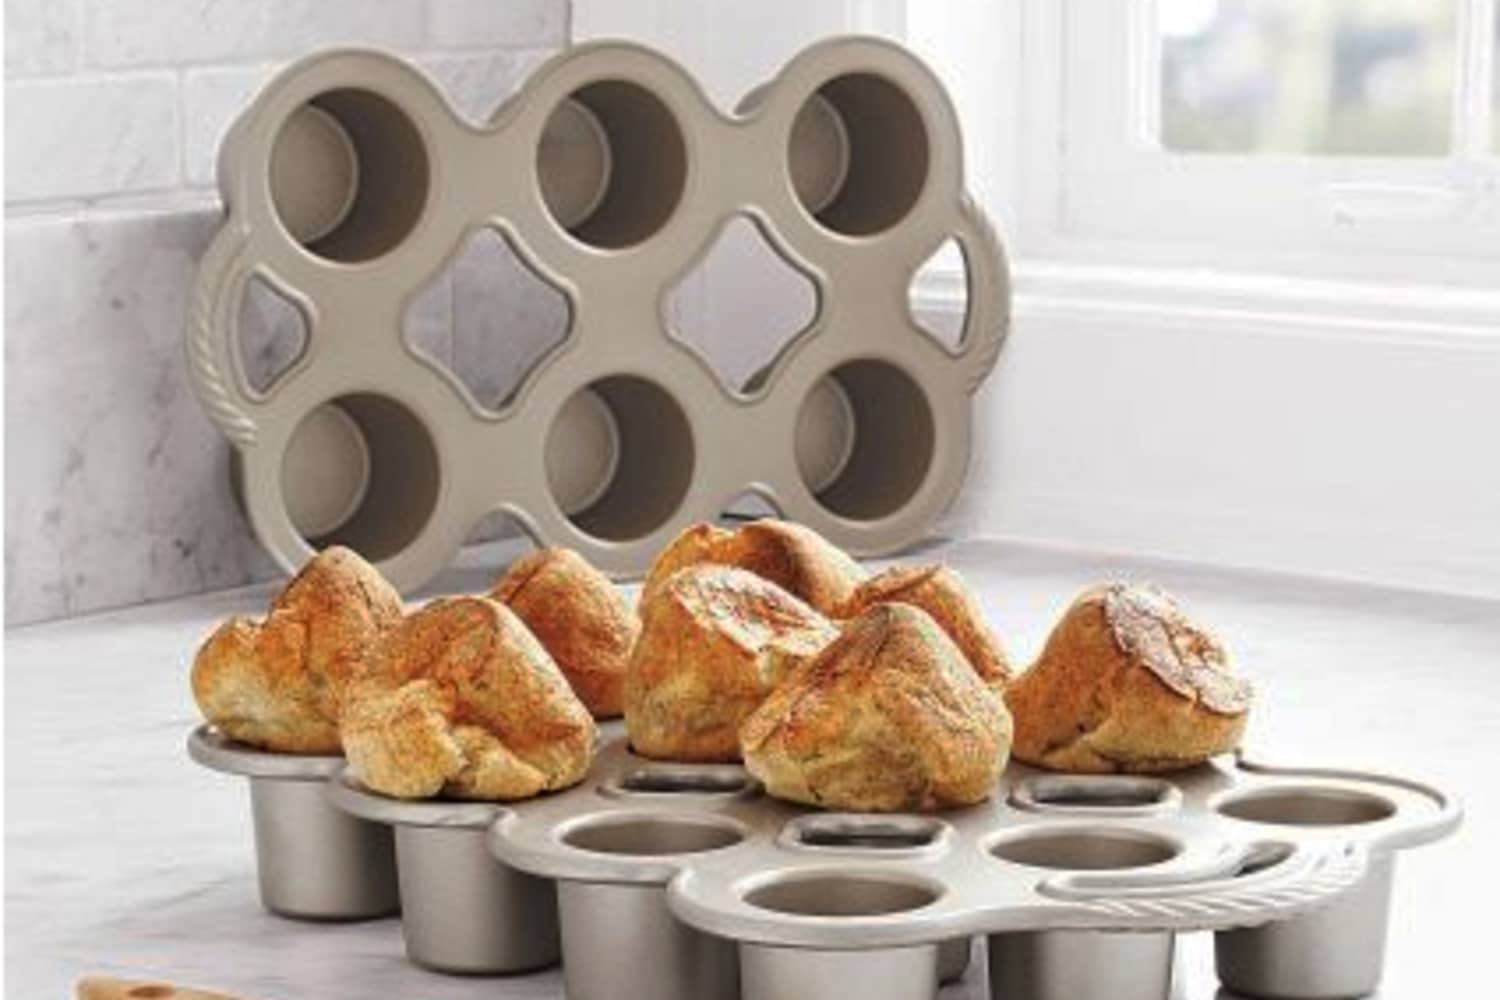 Popover Pans: Are They Necessary for Perfect Popovers?